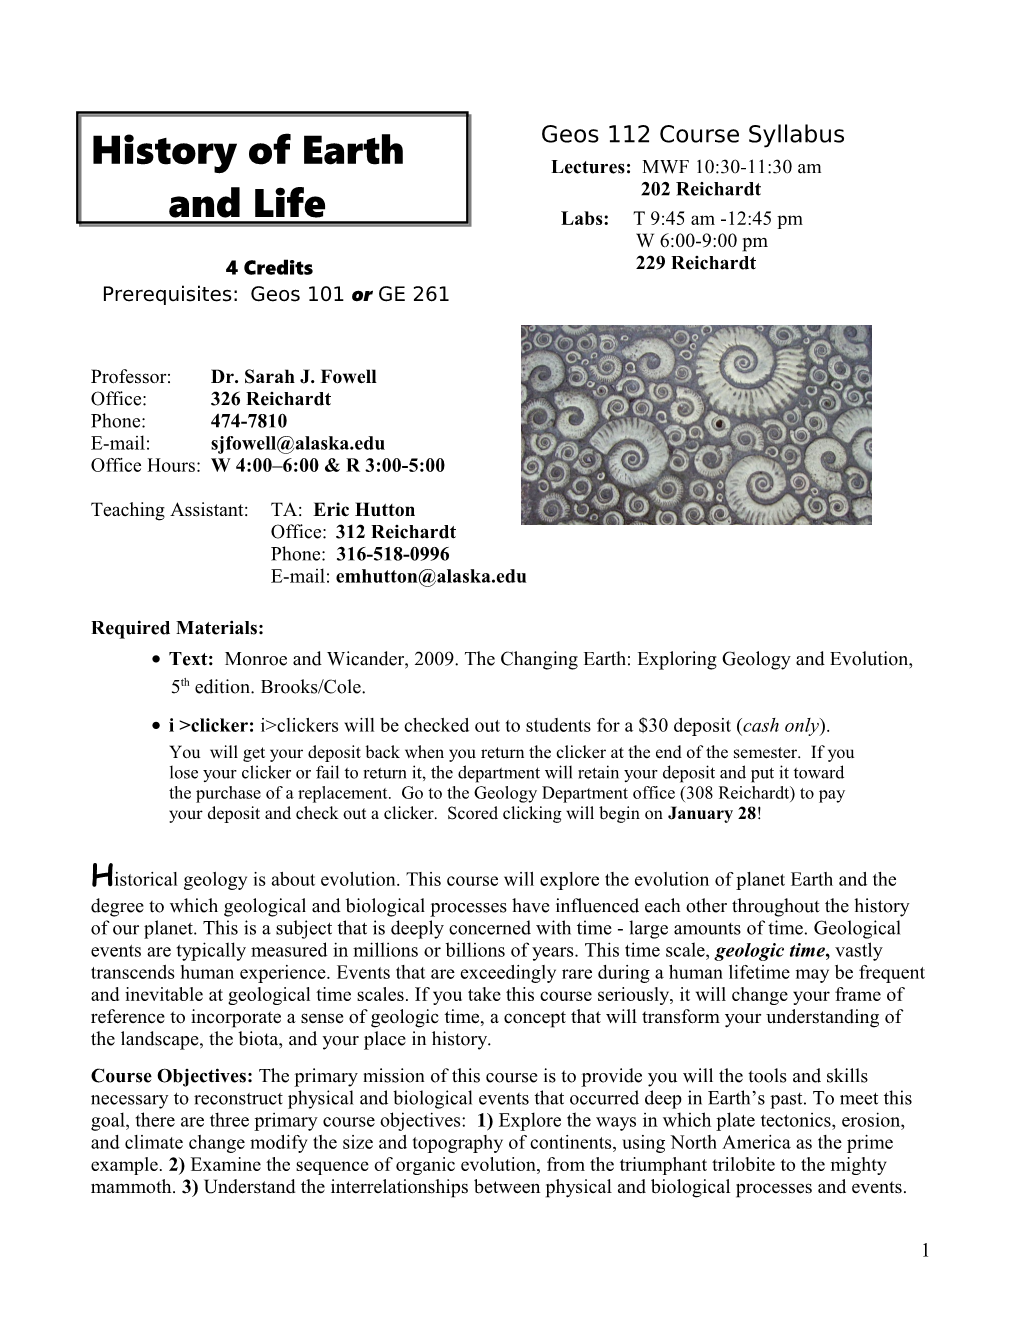 Syllabus: Geoscience 112 History of Earth and Life